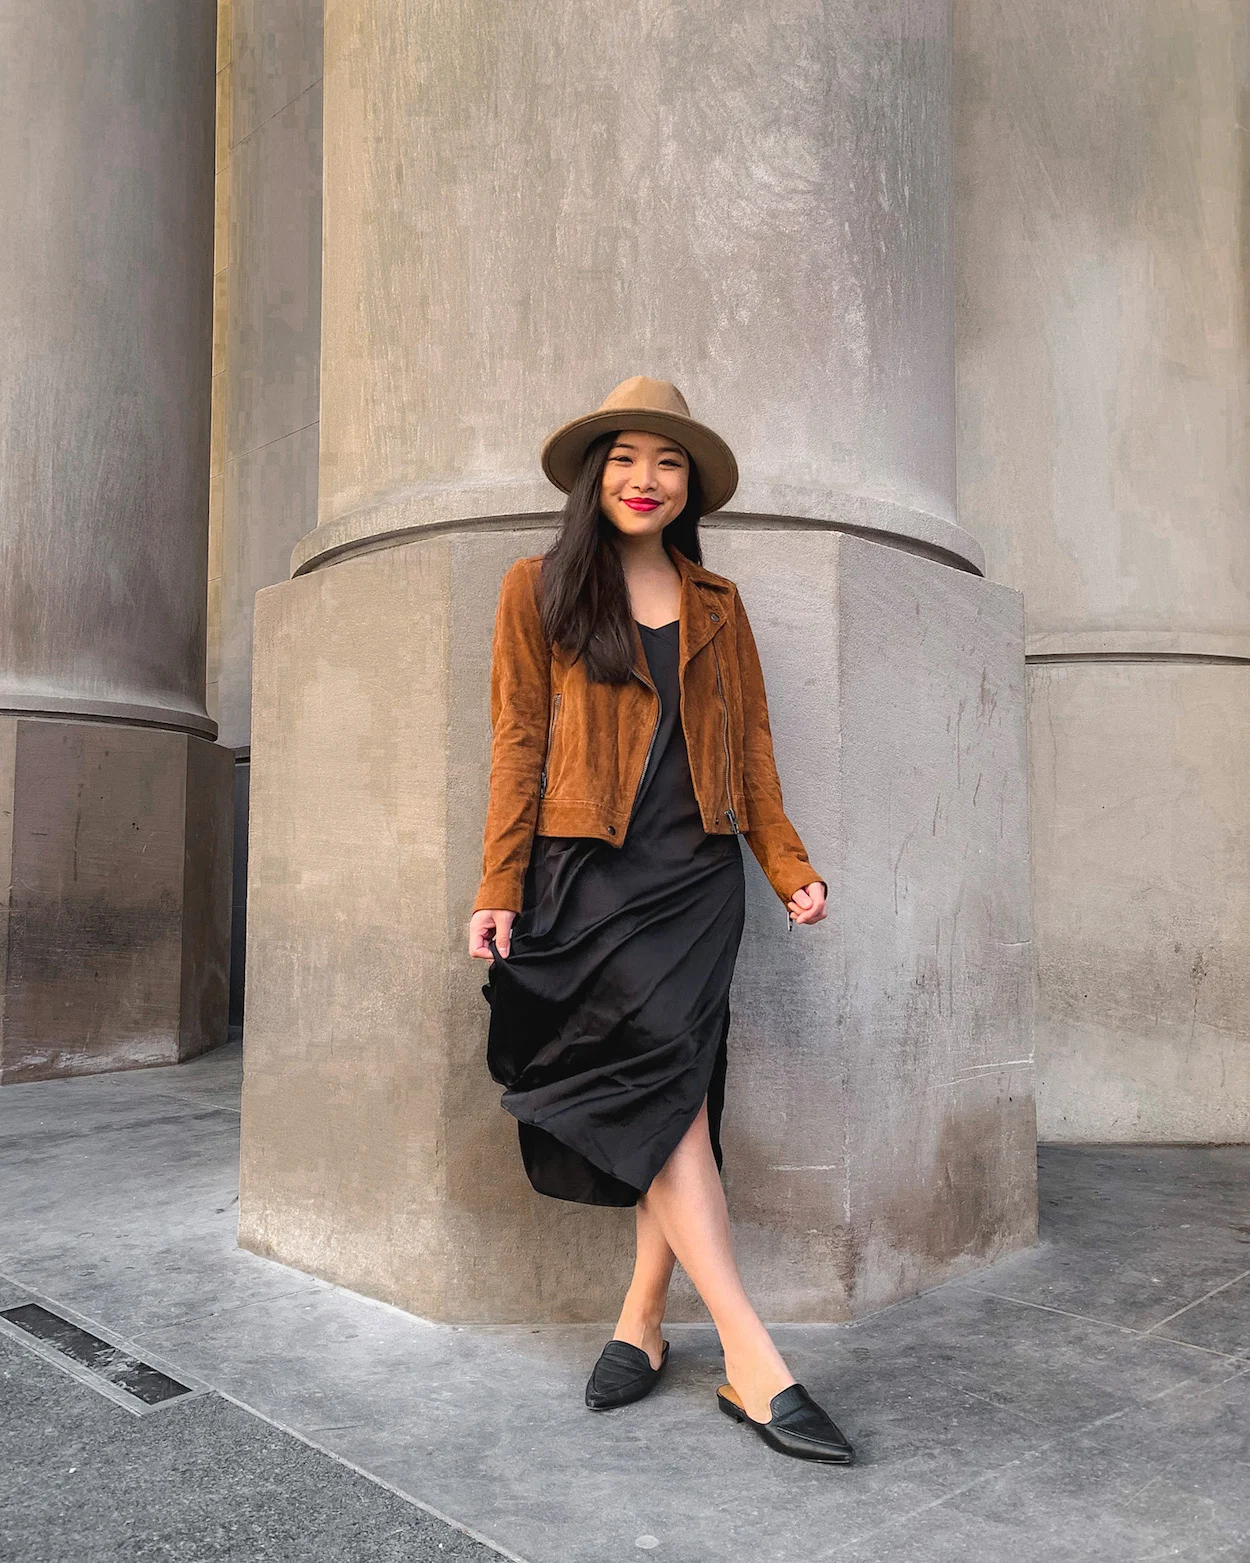 Fall outfit - The Drop slip dress and BLANKNYC suede moto jacket (Toronto Union Station)